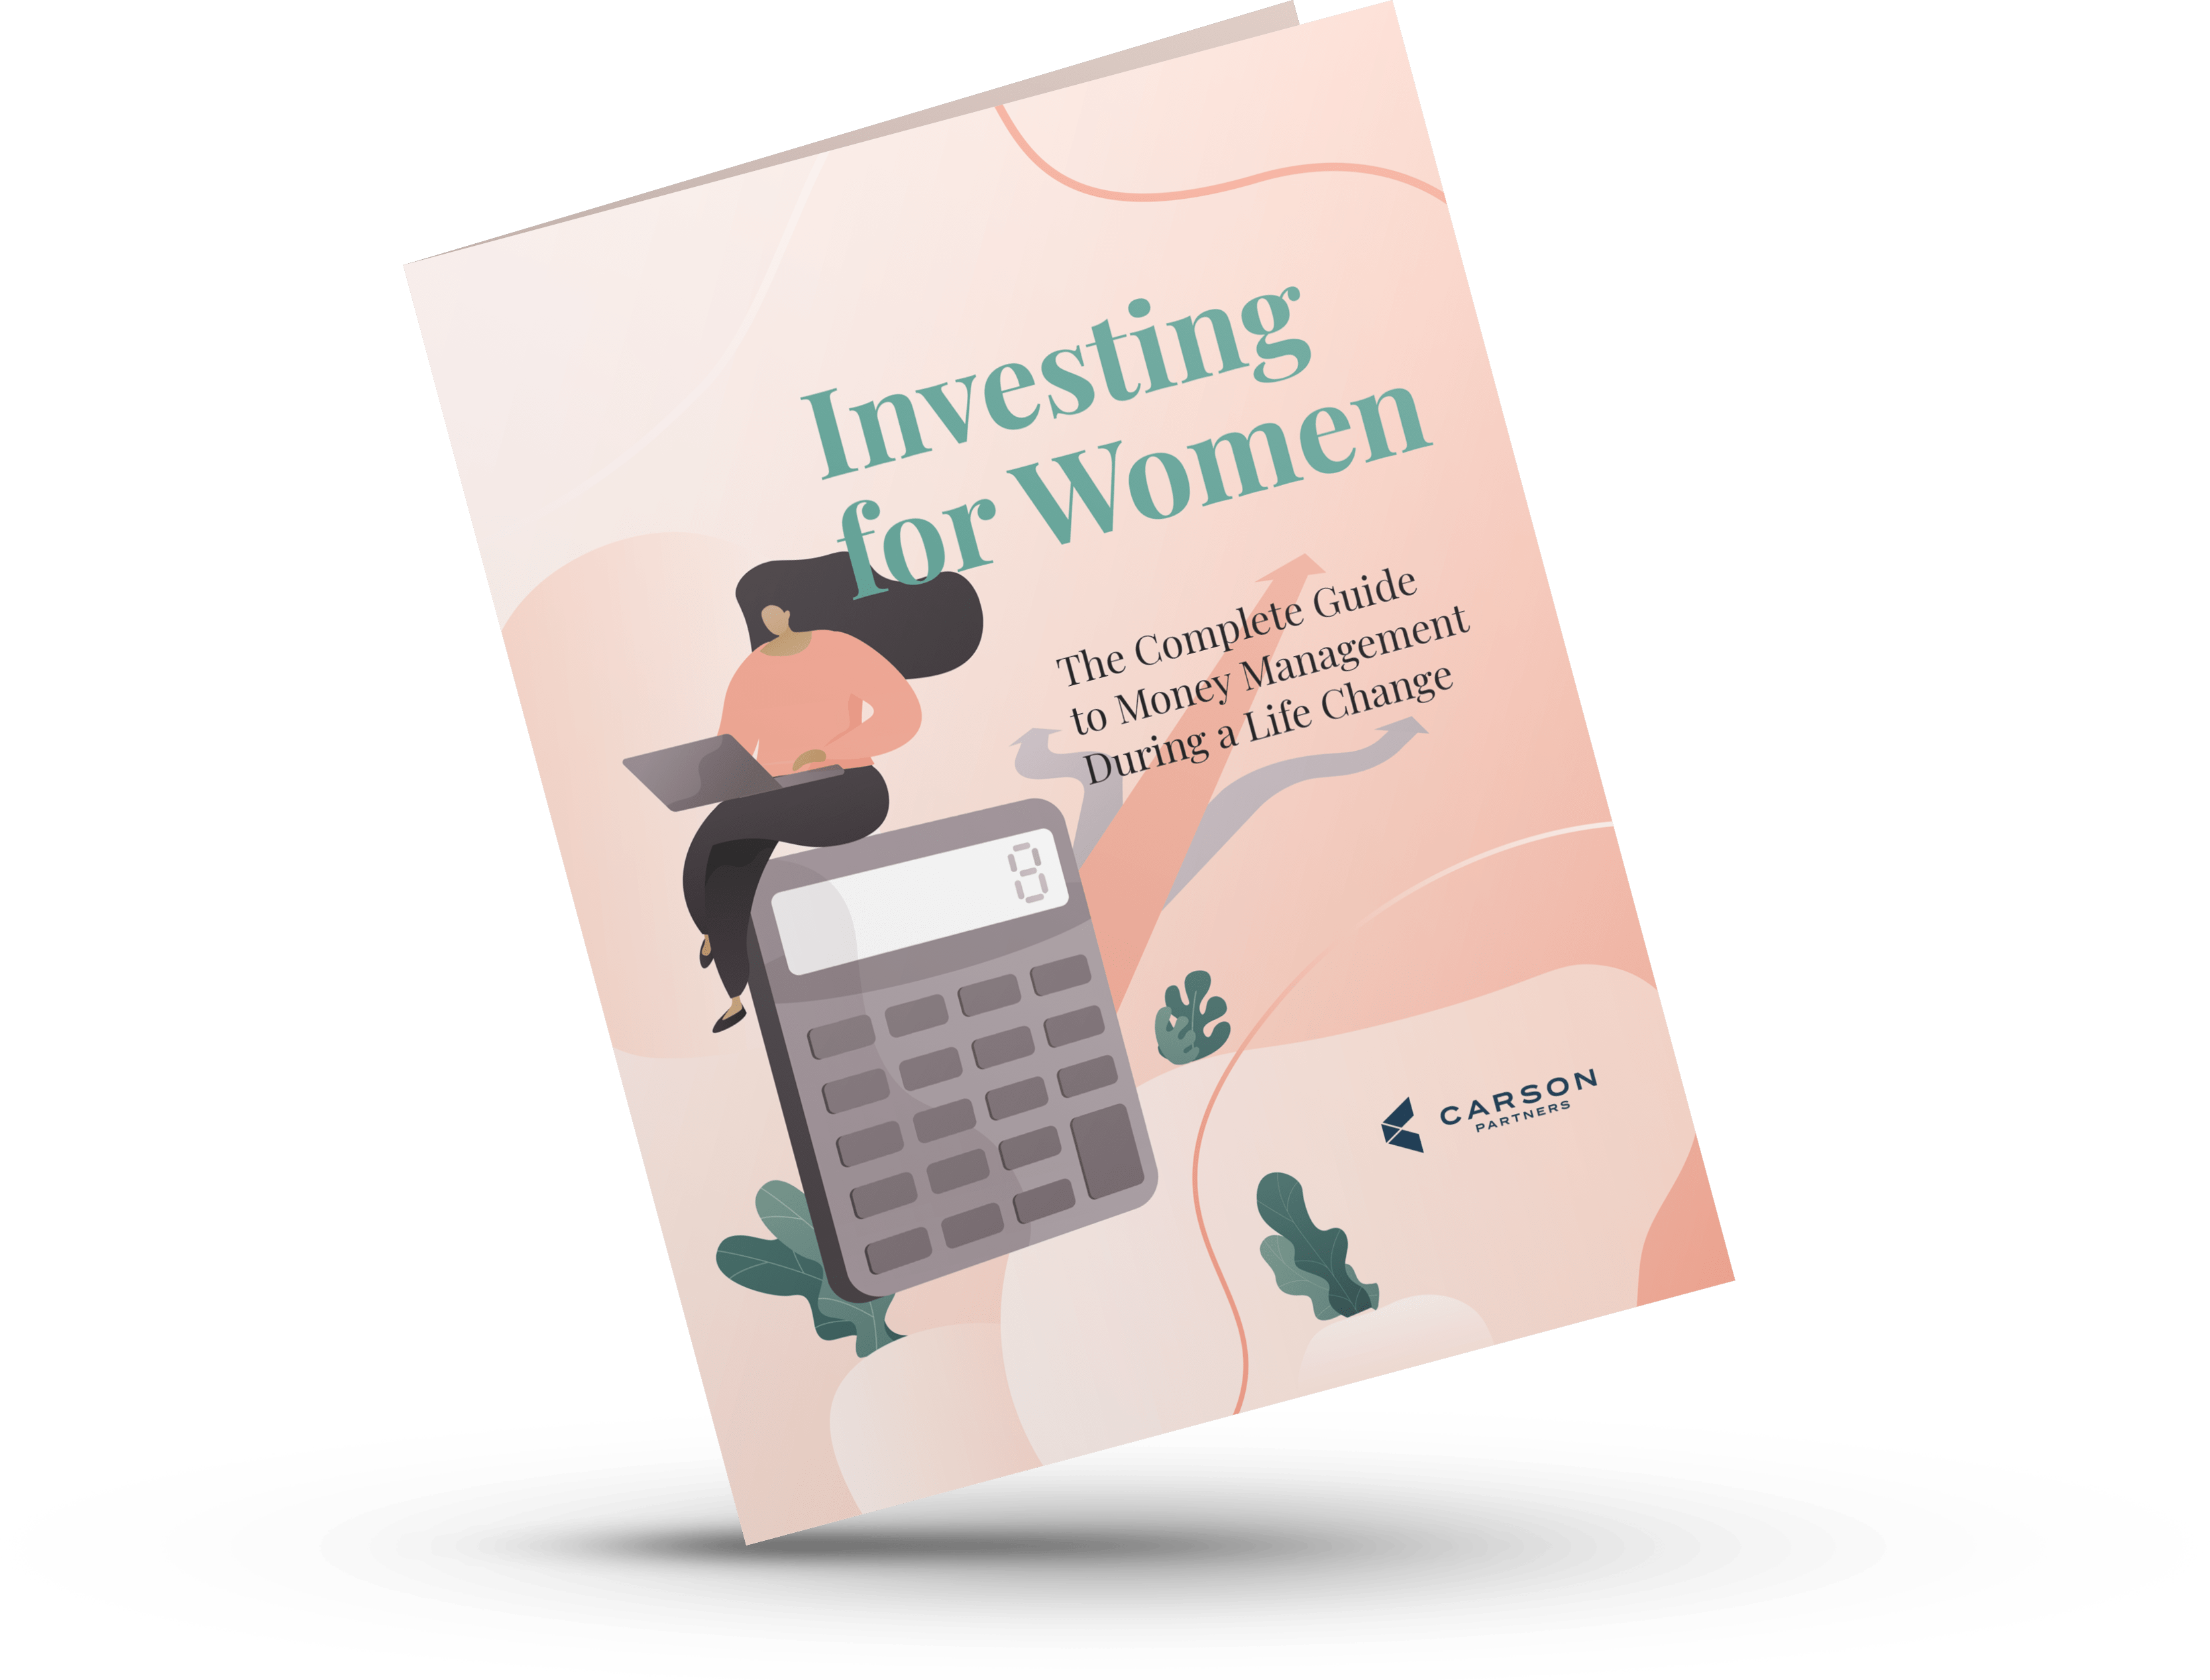 Resource: Investing for Women: The Complete Guide to Money Management During a Life Change